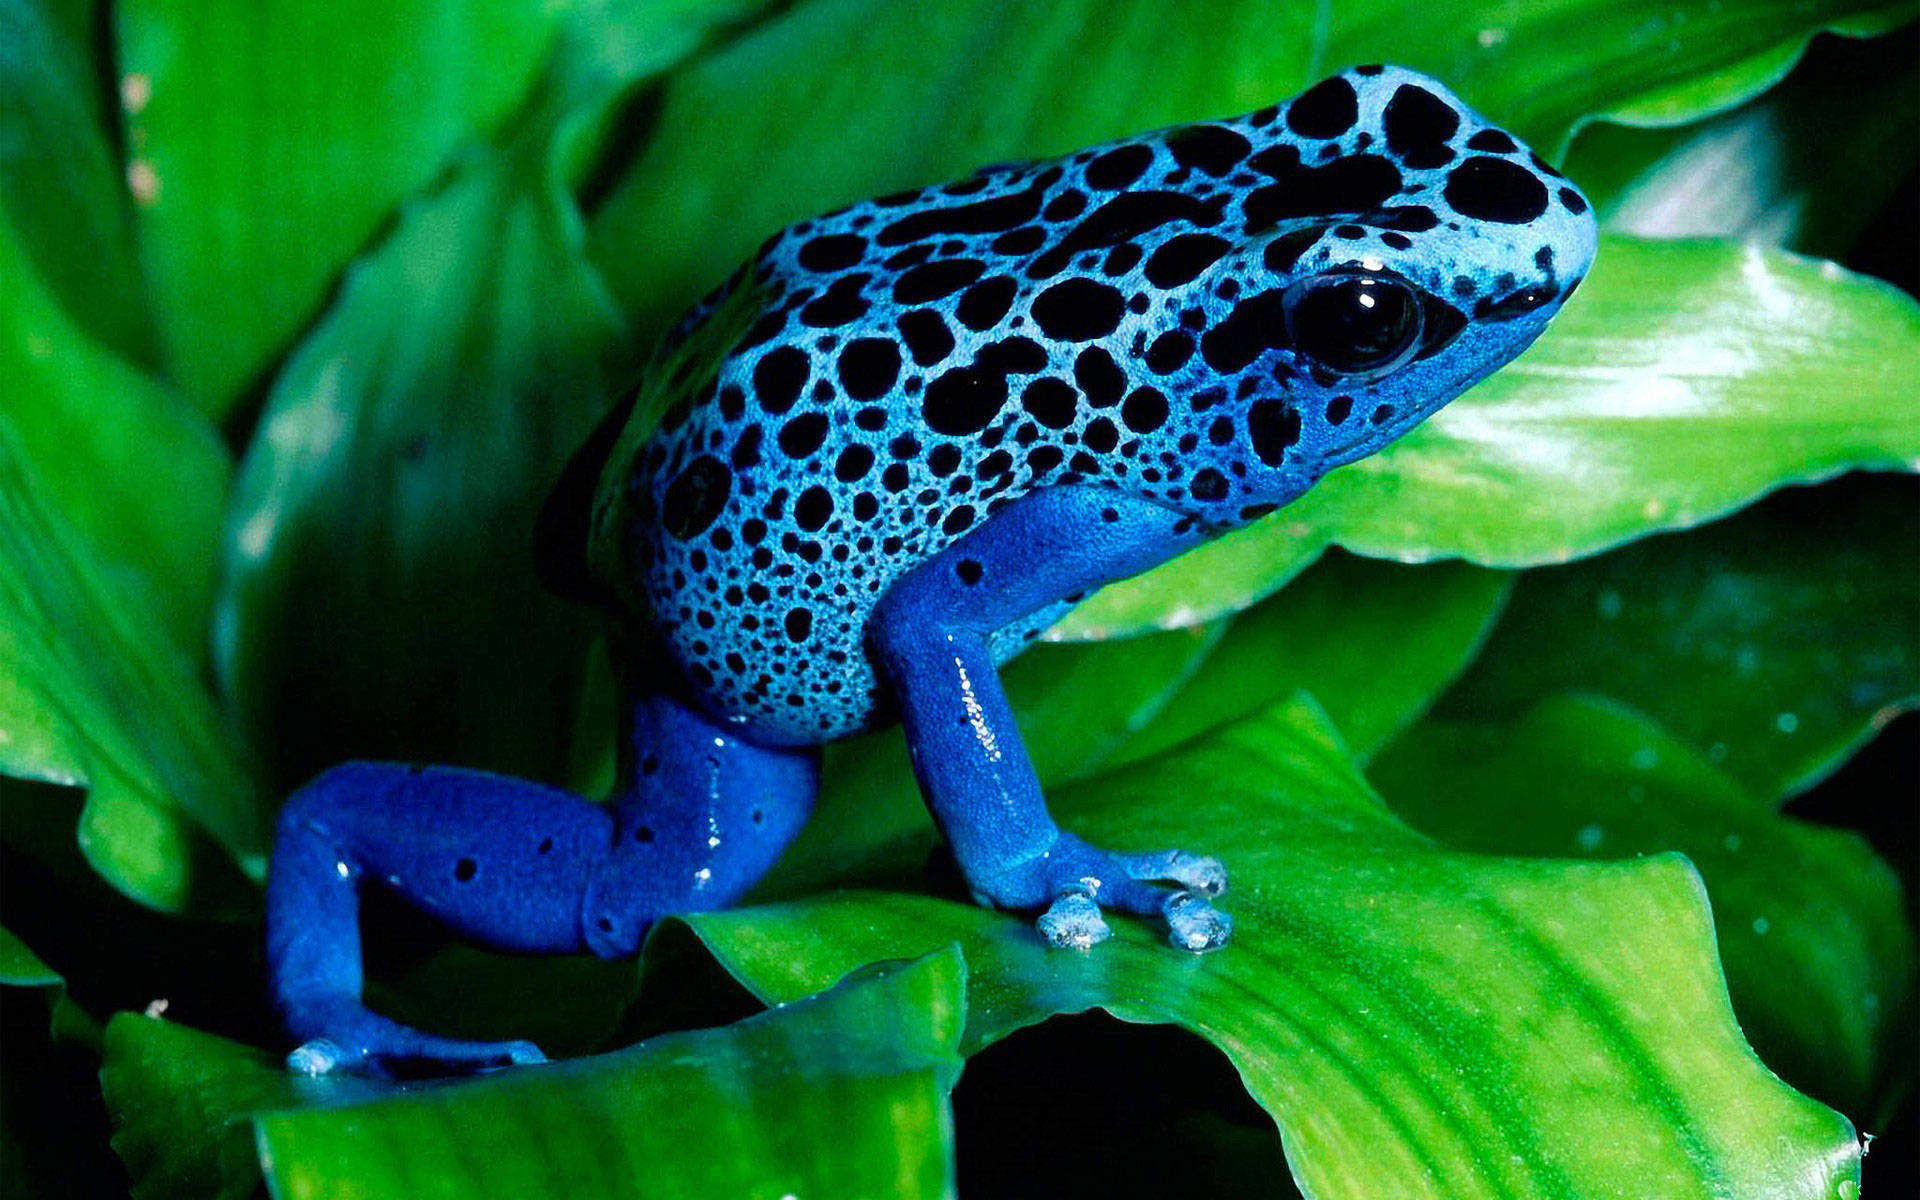 Cute Frog Blue And Black Spots